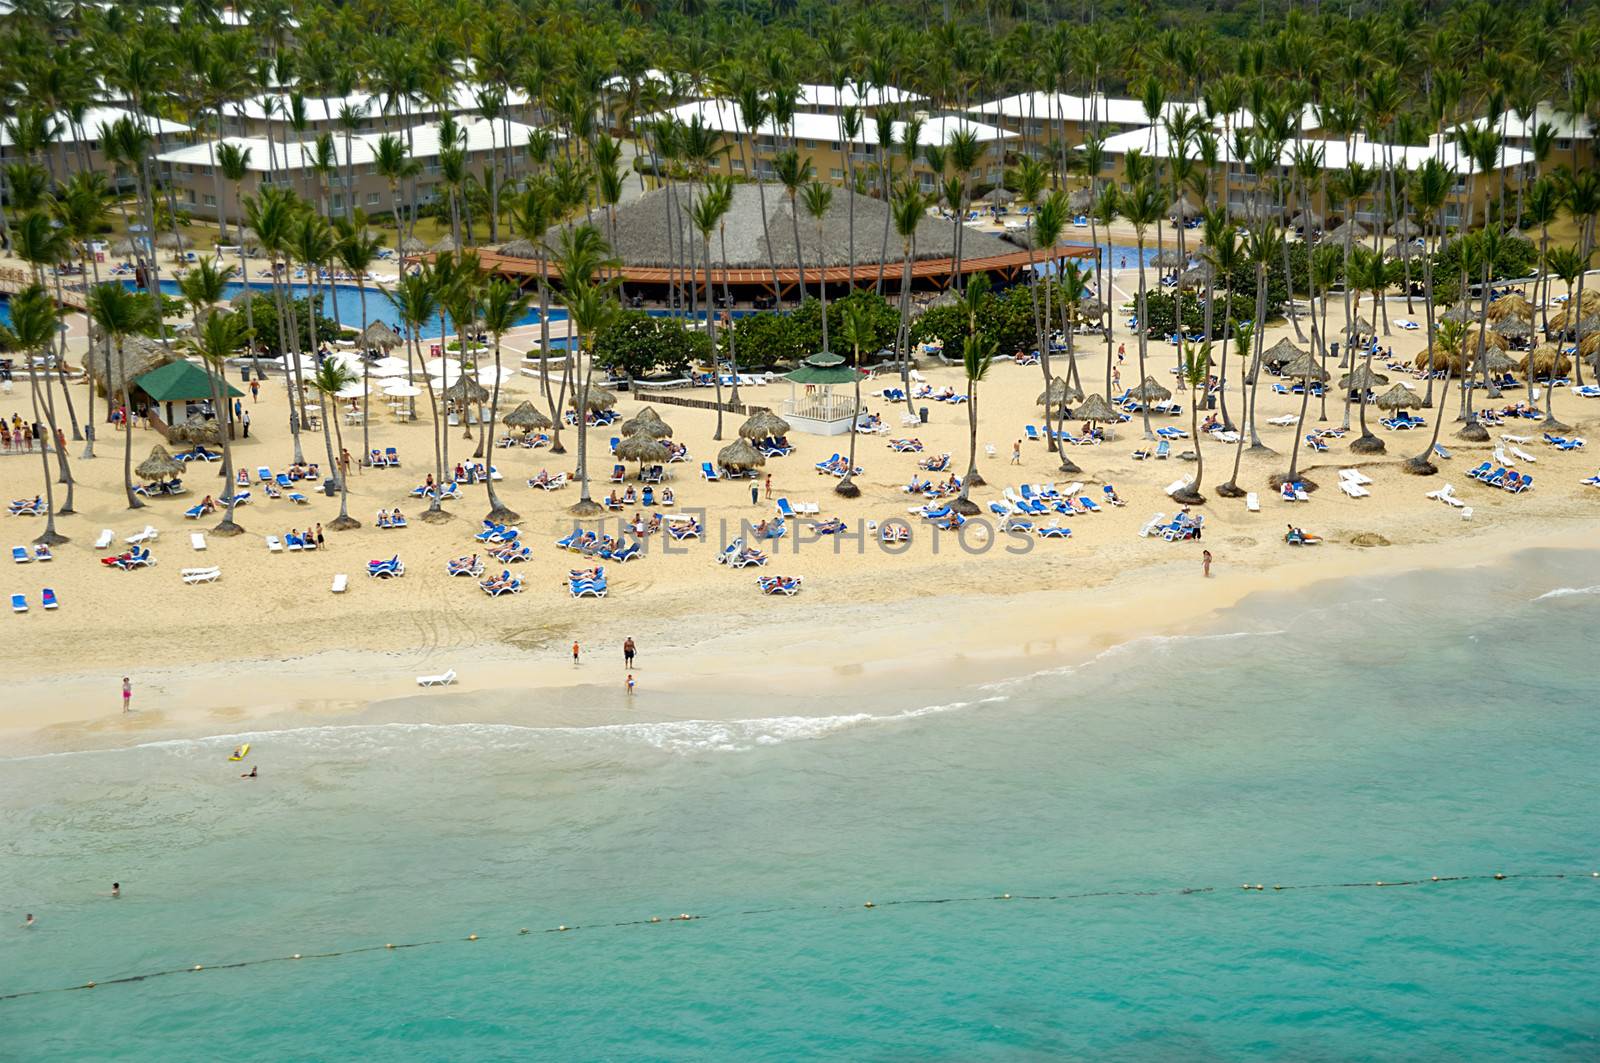 Hotel resort near exotic beach with palms. The Dominican Republic.